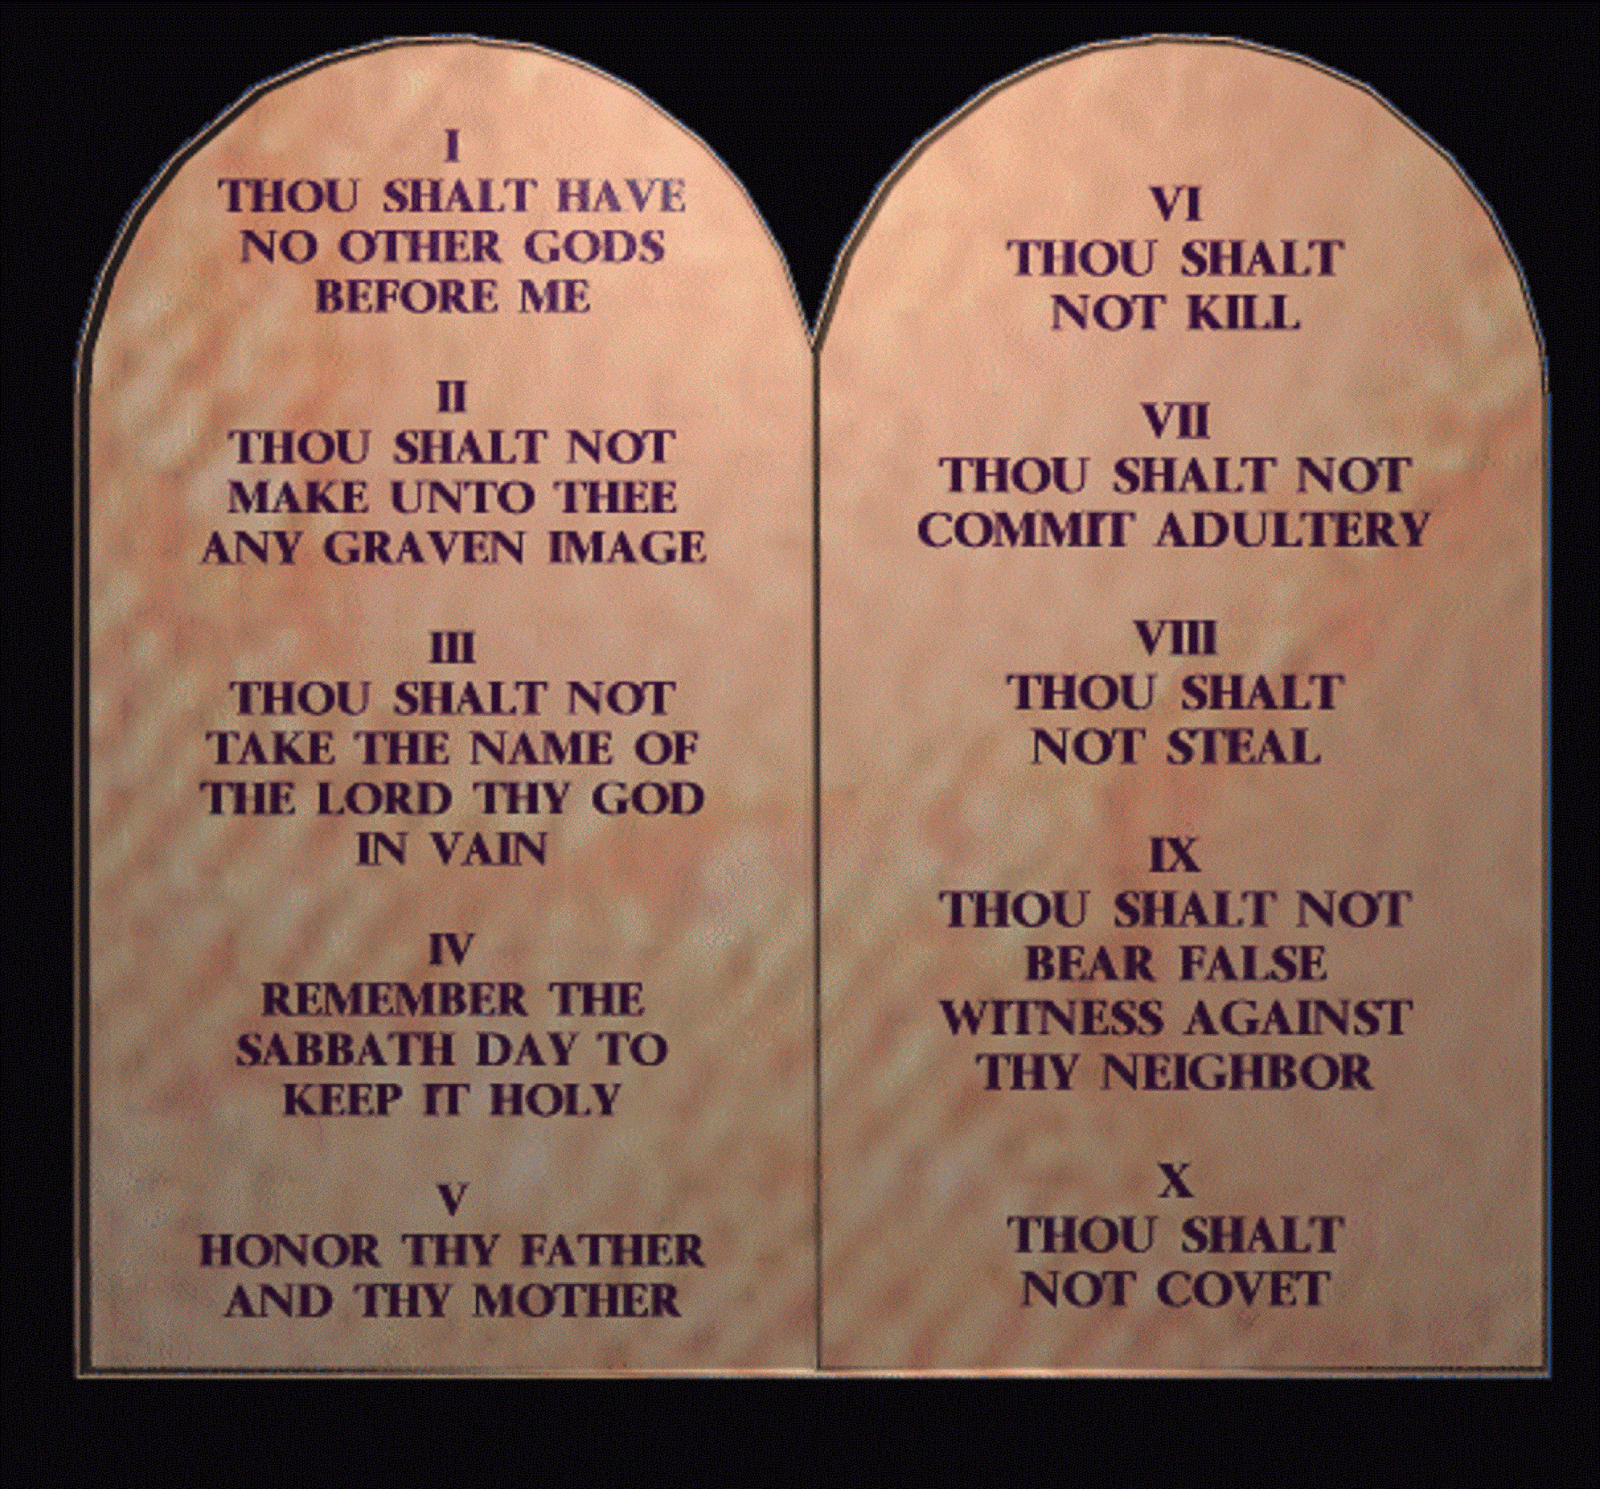 MAKES YOU WANT TO OBEY THE 10 COMMANDMENTS LIKE WE ARE SUPPOSED TO DO